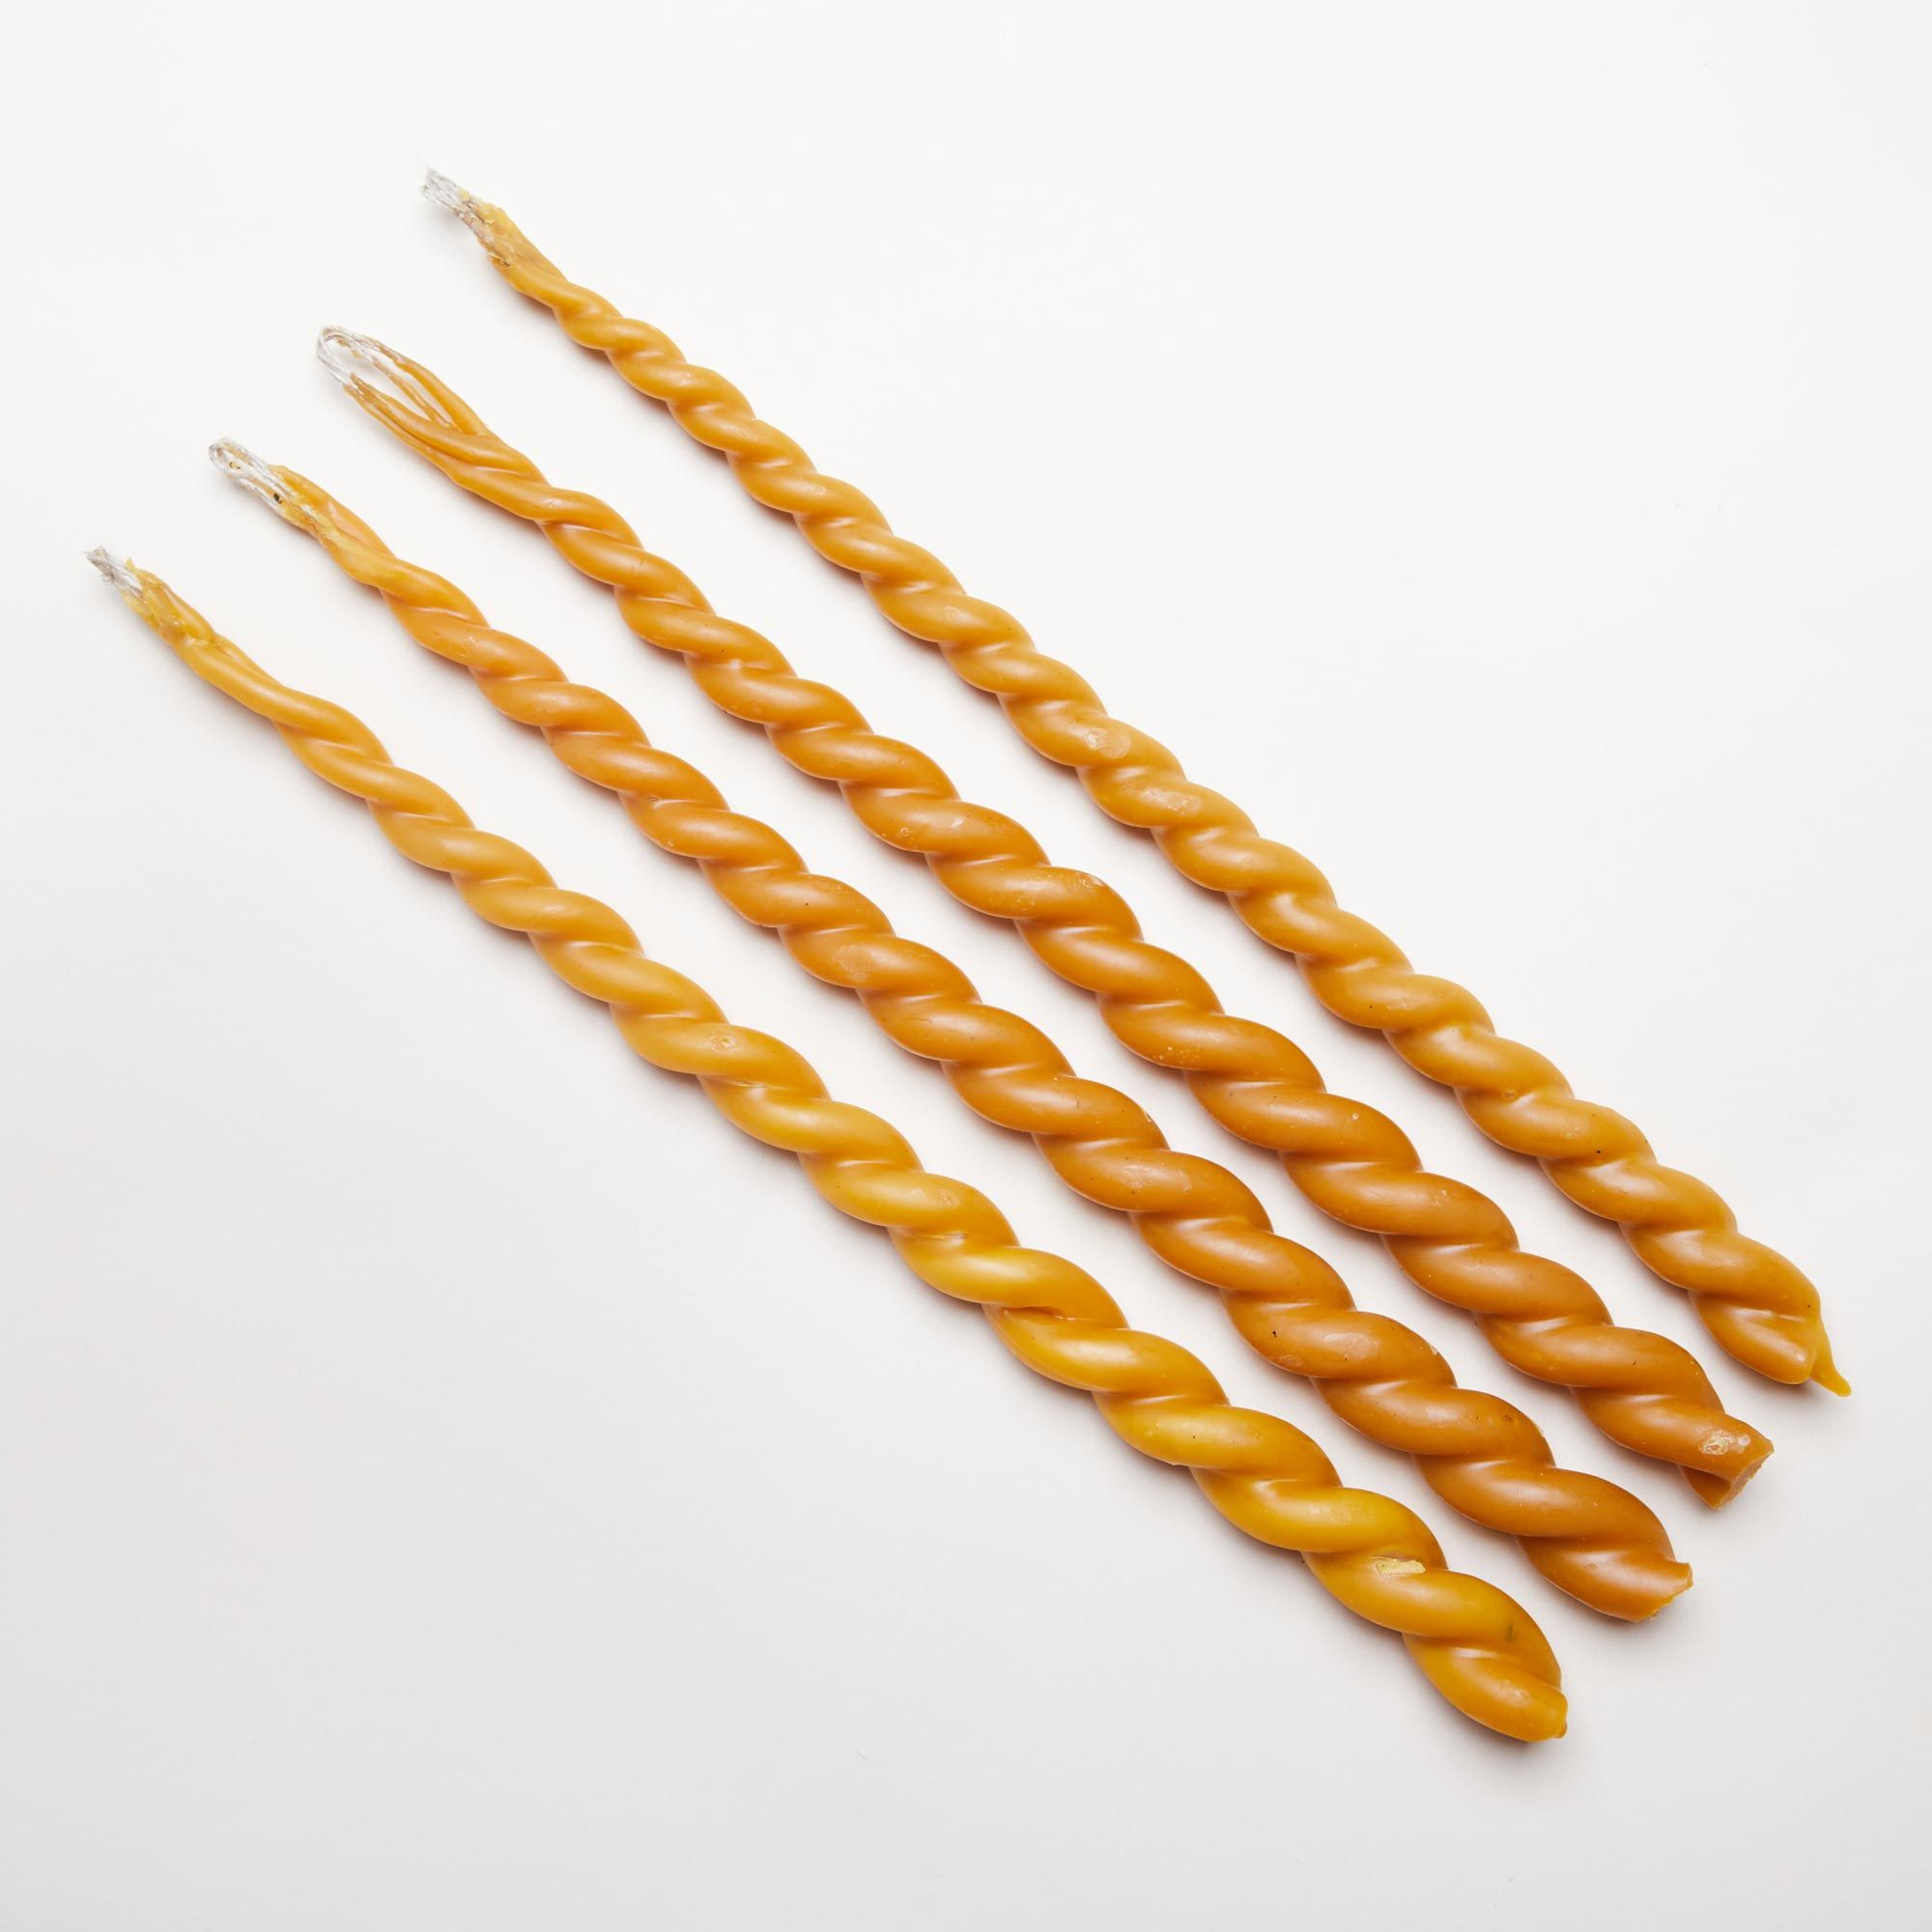 Four long twisted candles in various shades of golden yellow